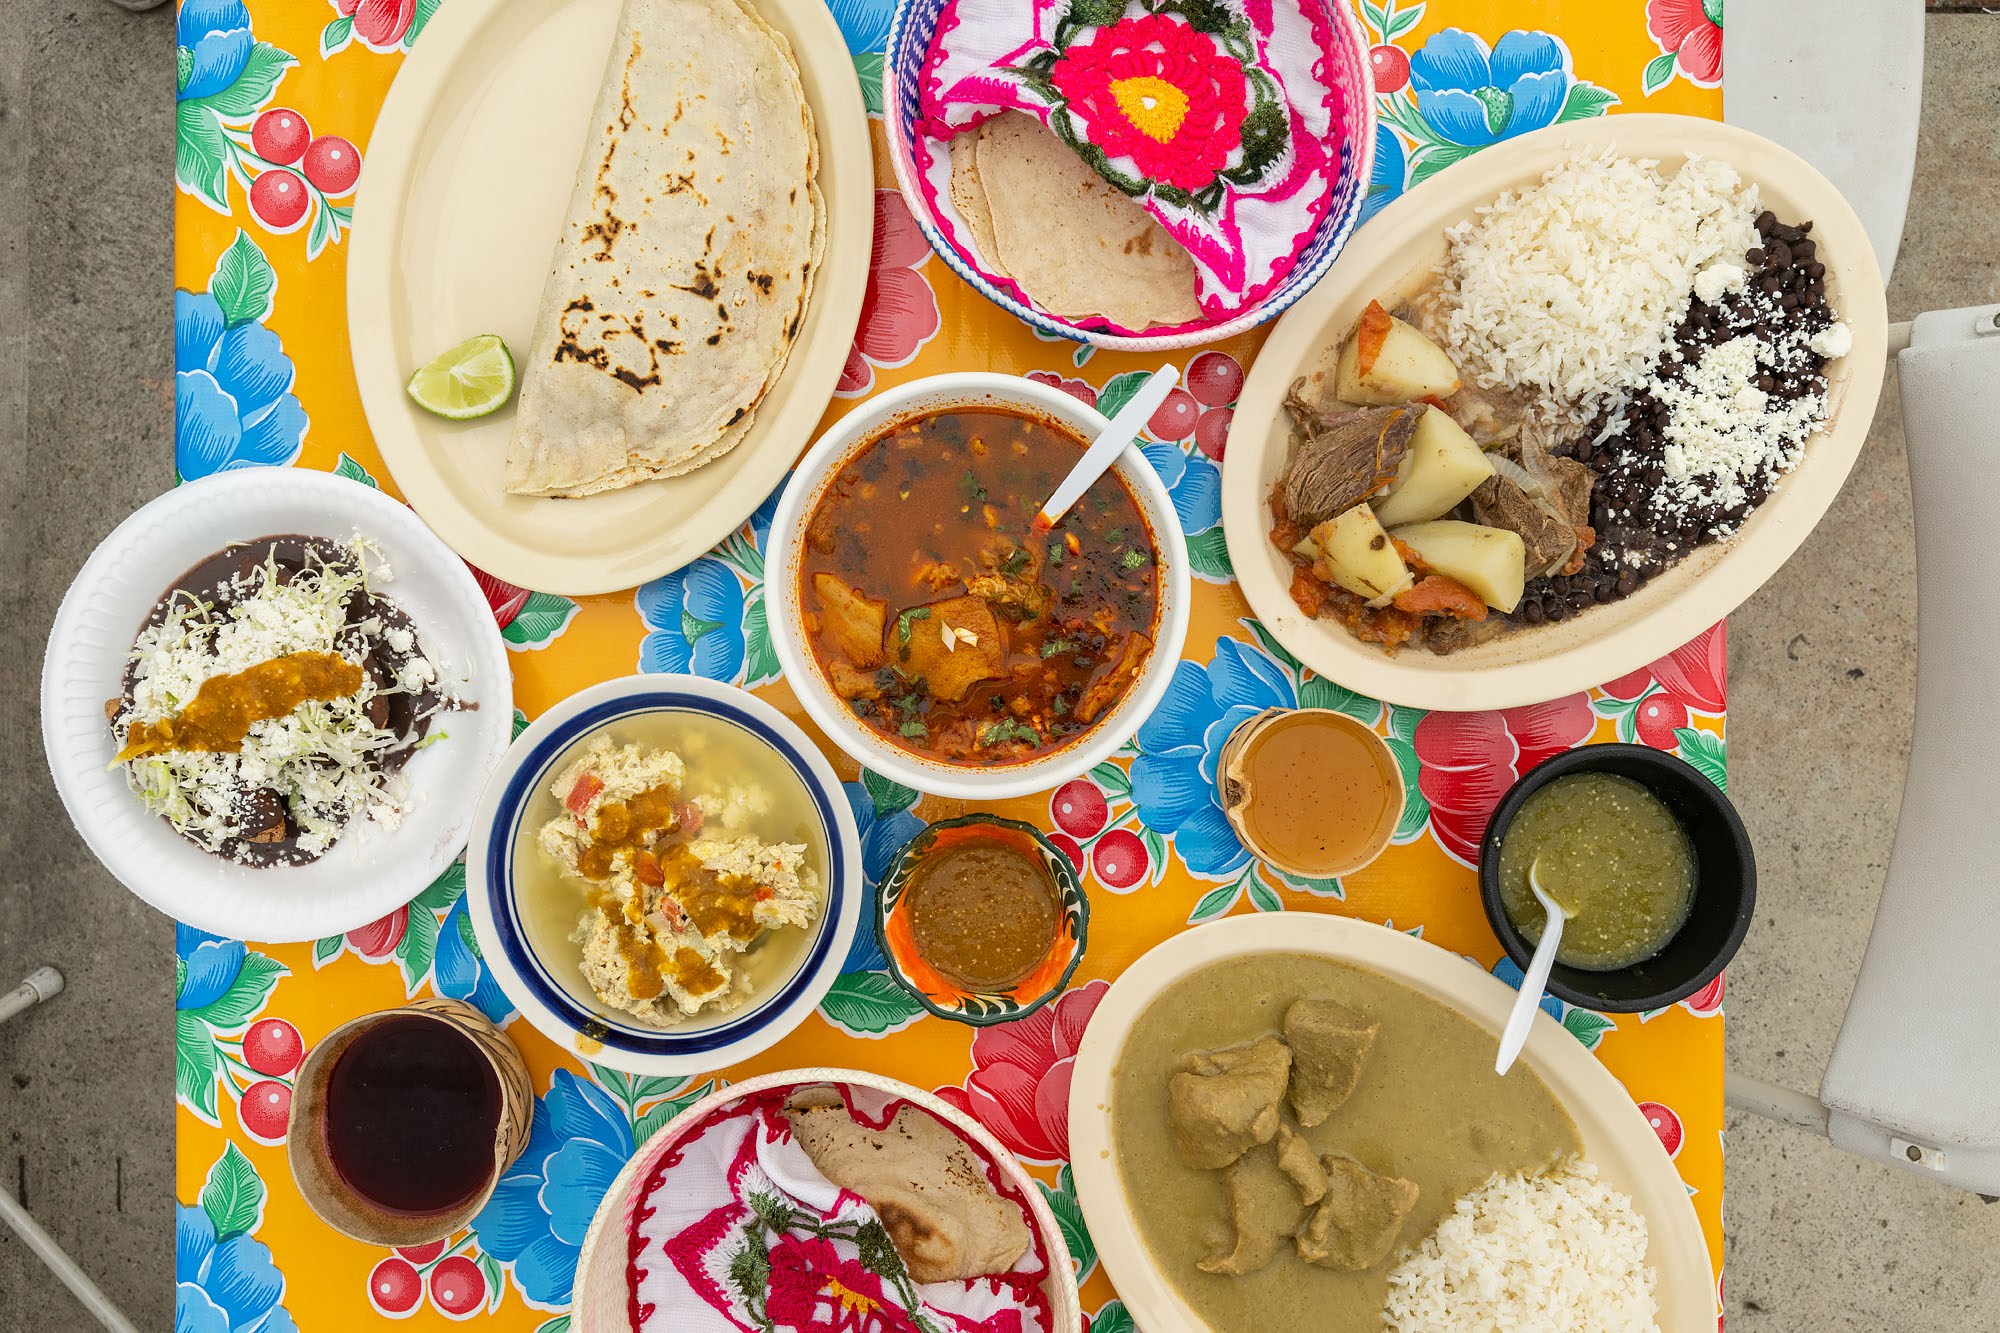 Dishes from Comedor Tenchita in LA’s Mid-City neighborhood on a colorful traditional table.